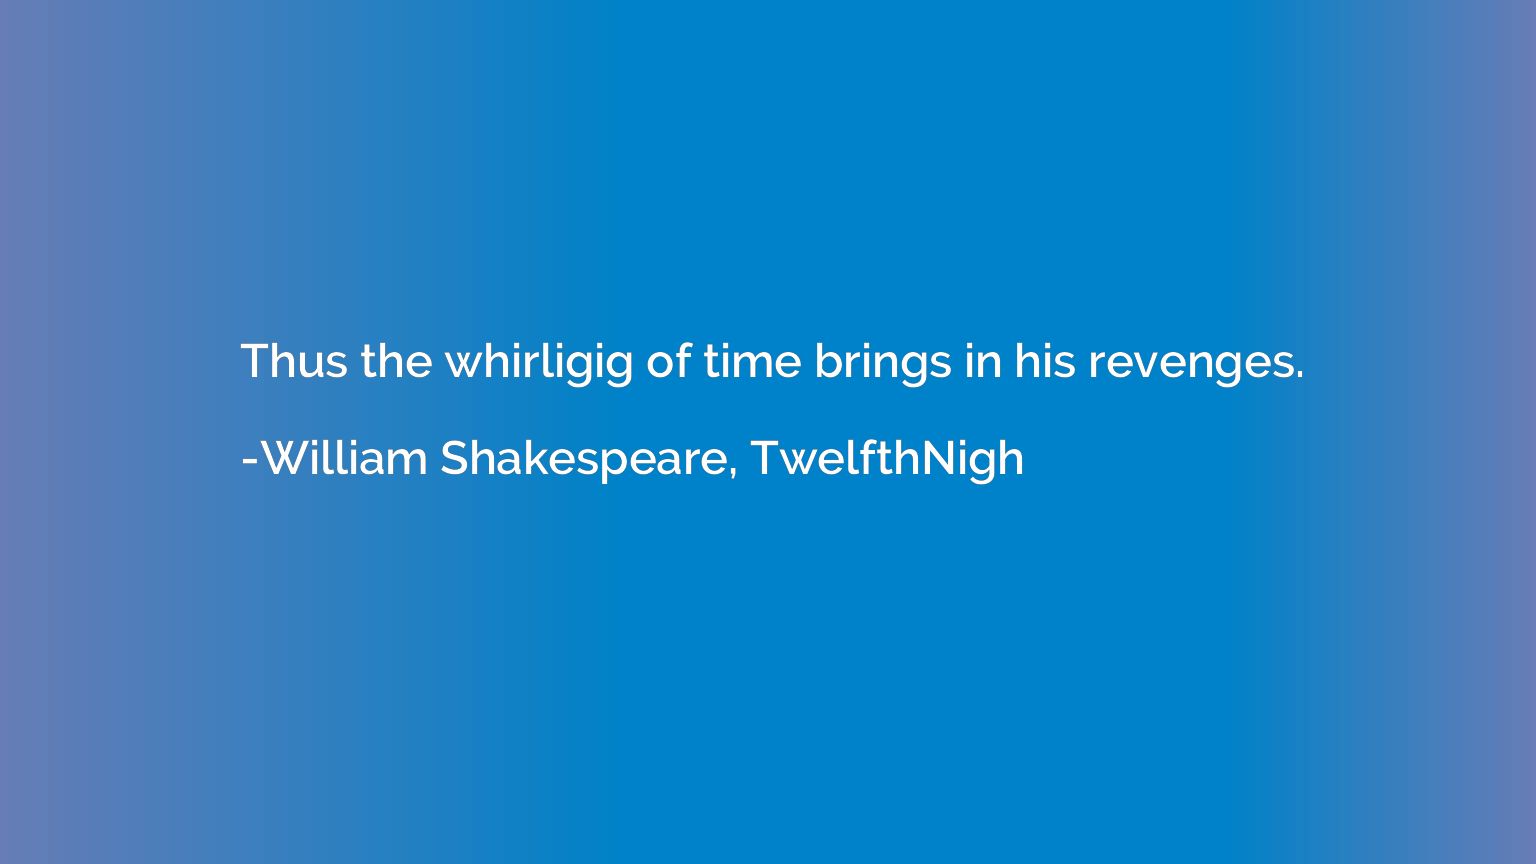 Thus the whirligig of time brings in his revenges.